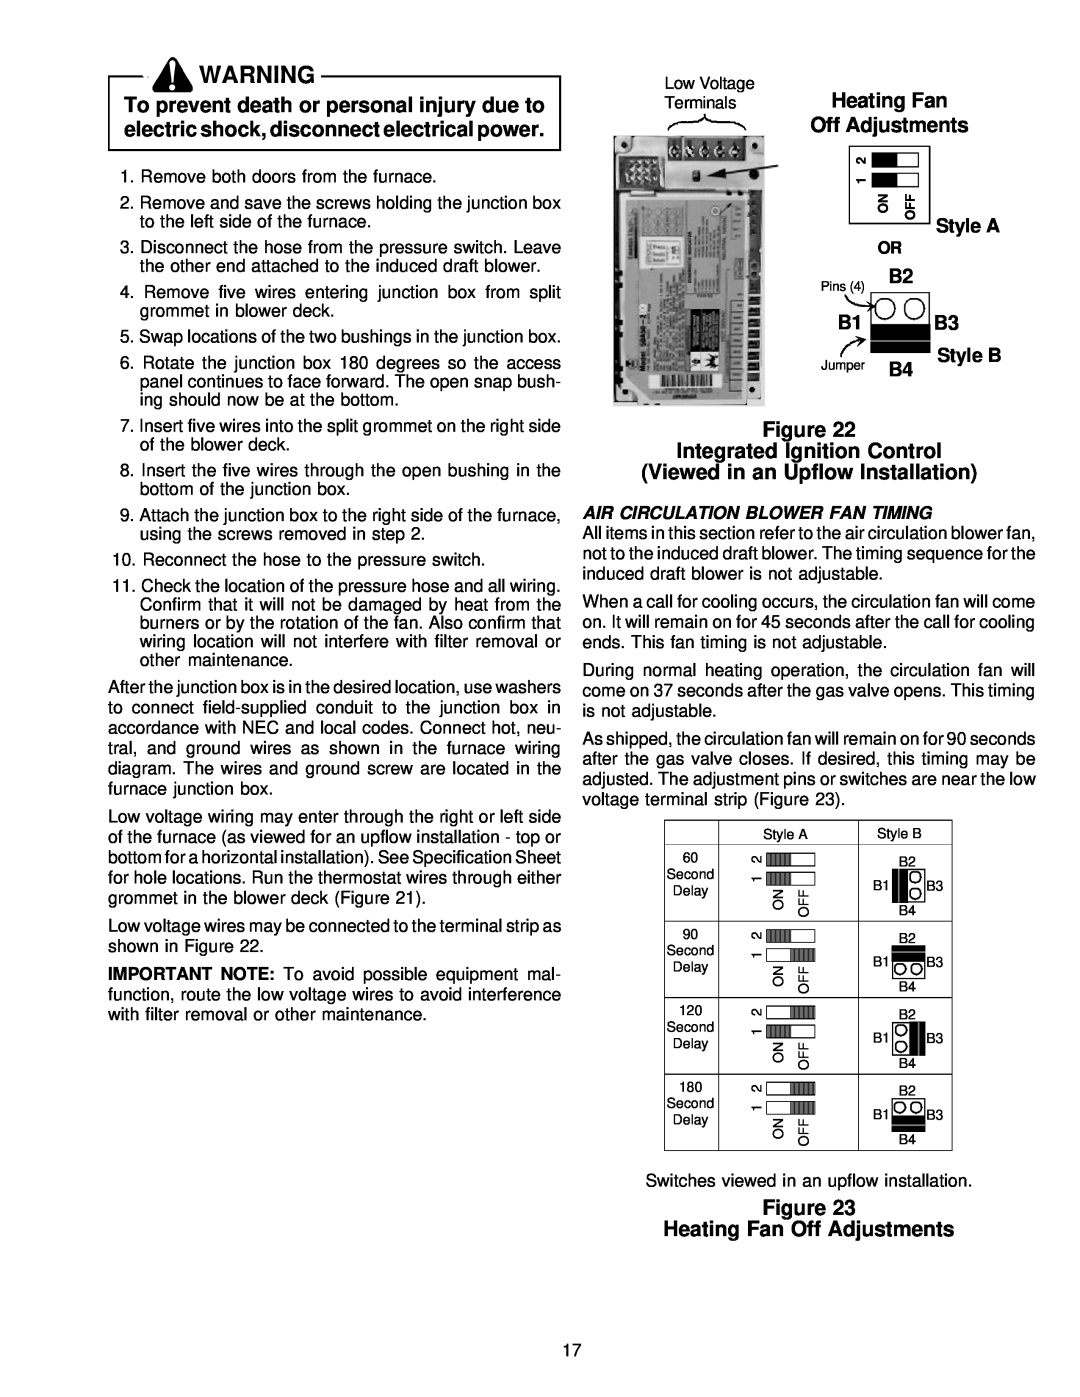 Amana VR8205 Figure Integrated Ignition Control, Viewed in an Upflow Installation, Figure Heating Fan Off Adjustments 